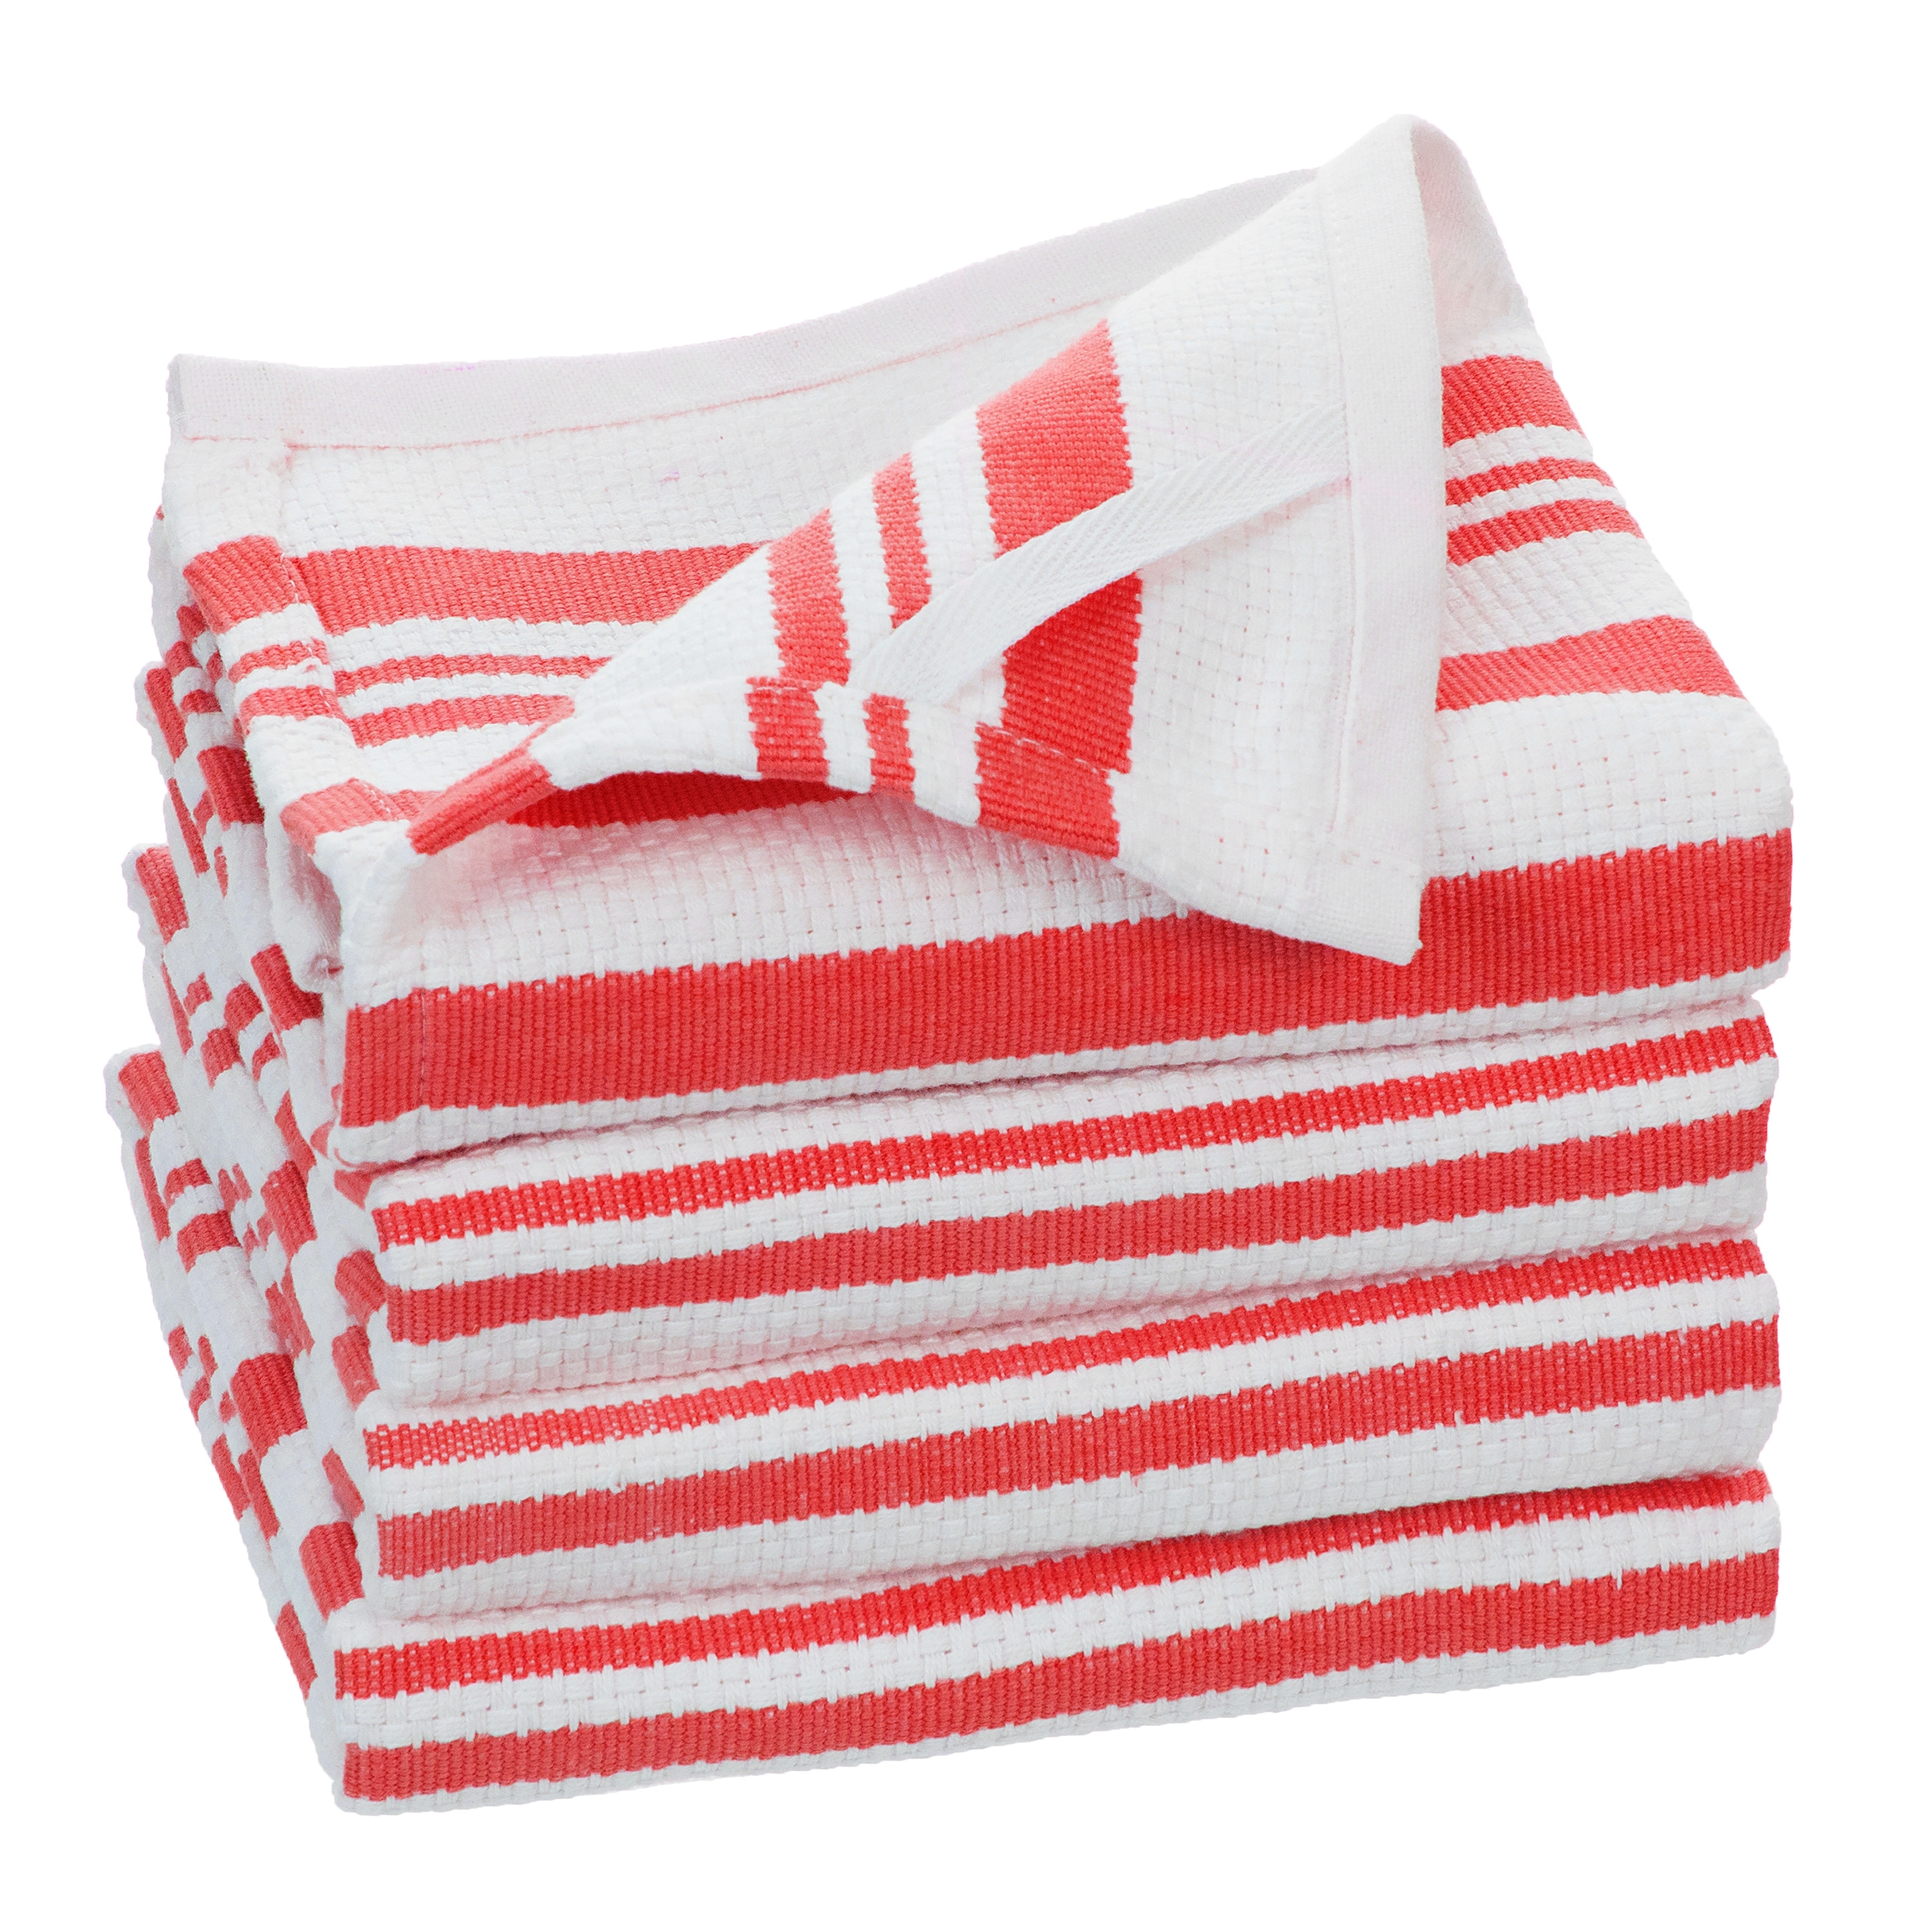 https://ak1.ostkcdn.com/images/products/is/images/direct/59f7e89cc775a5542080628b9c266e06bcde066f/Fabstyles-Broadway-Stripe-Cotton-Kitchen-Towels.jpg